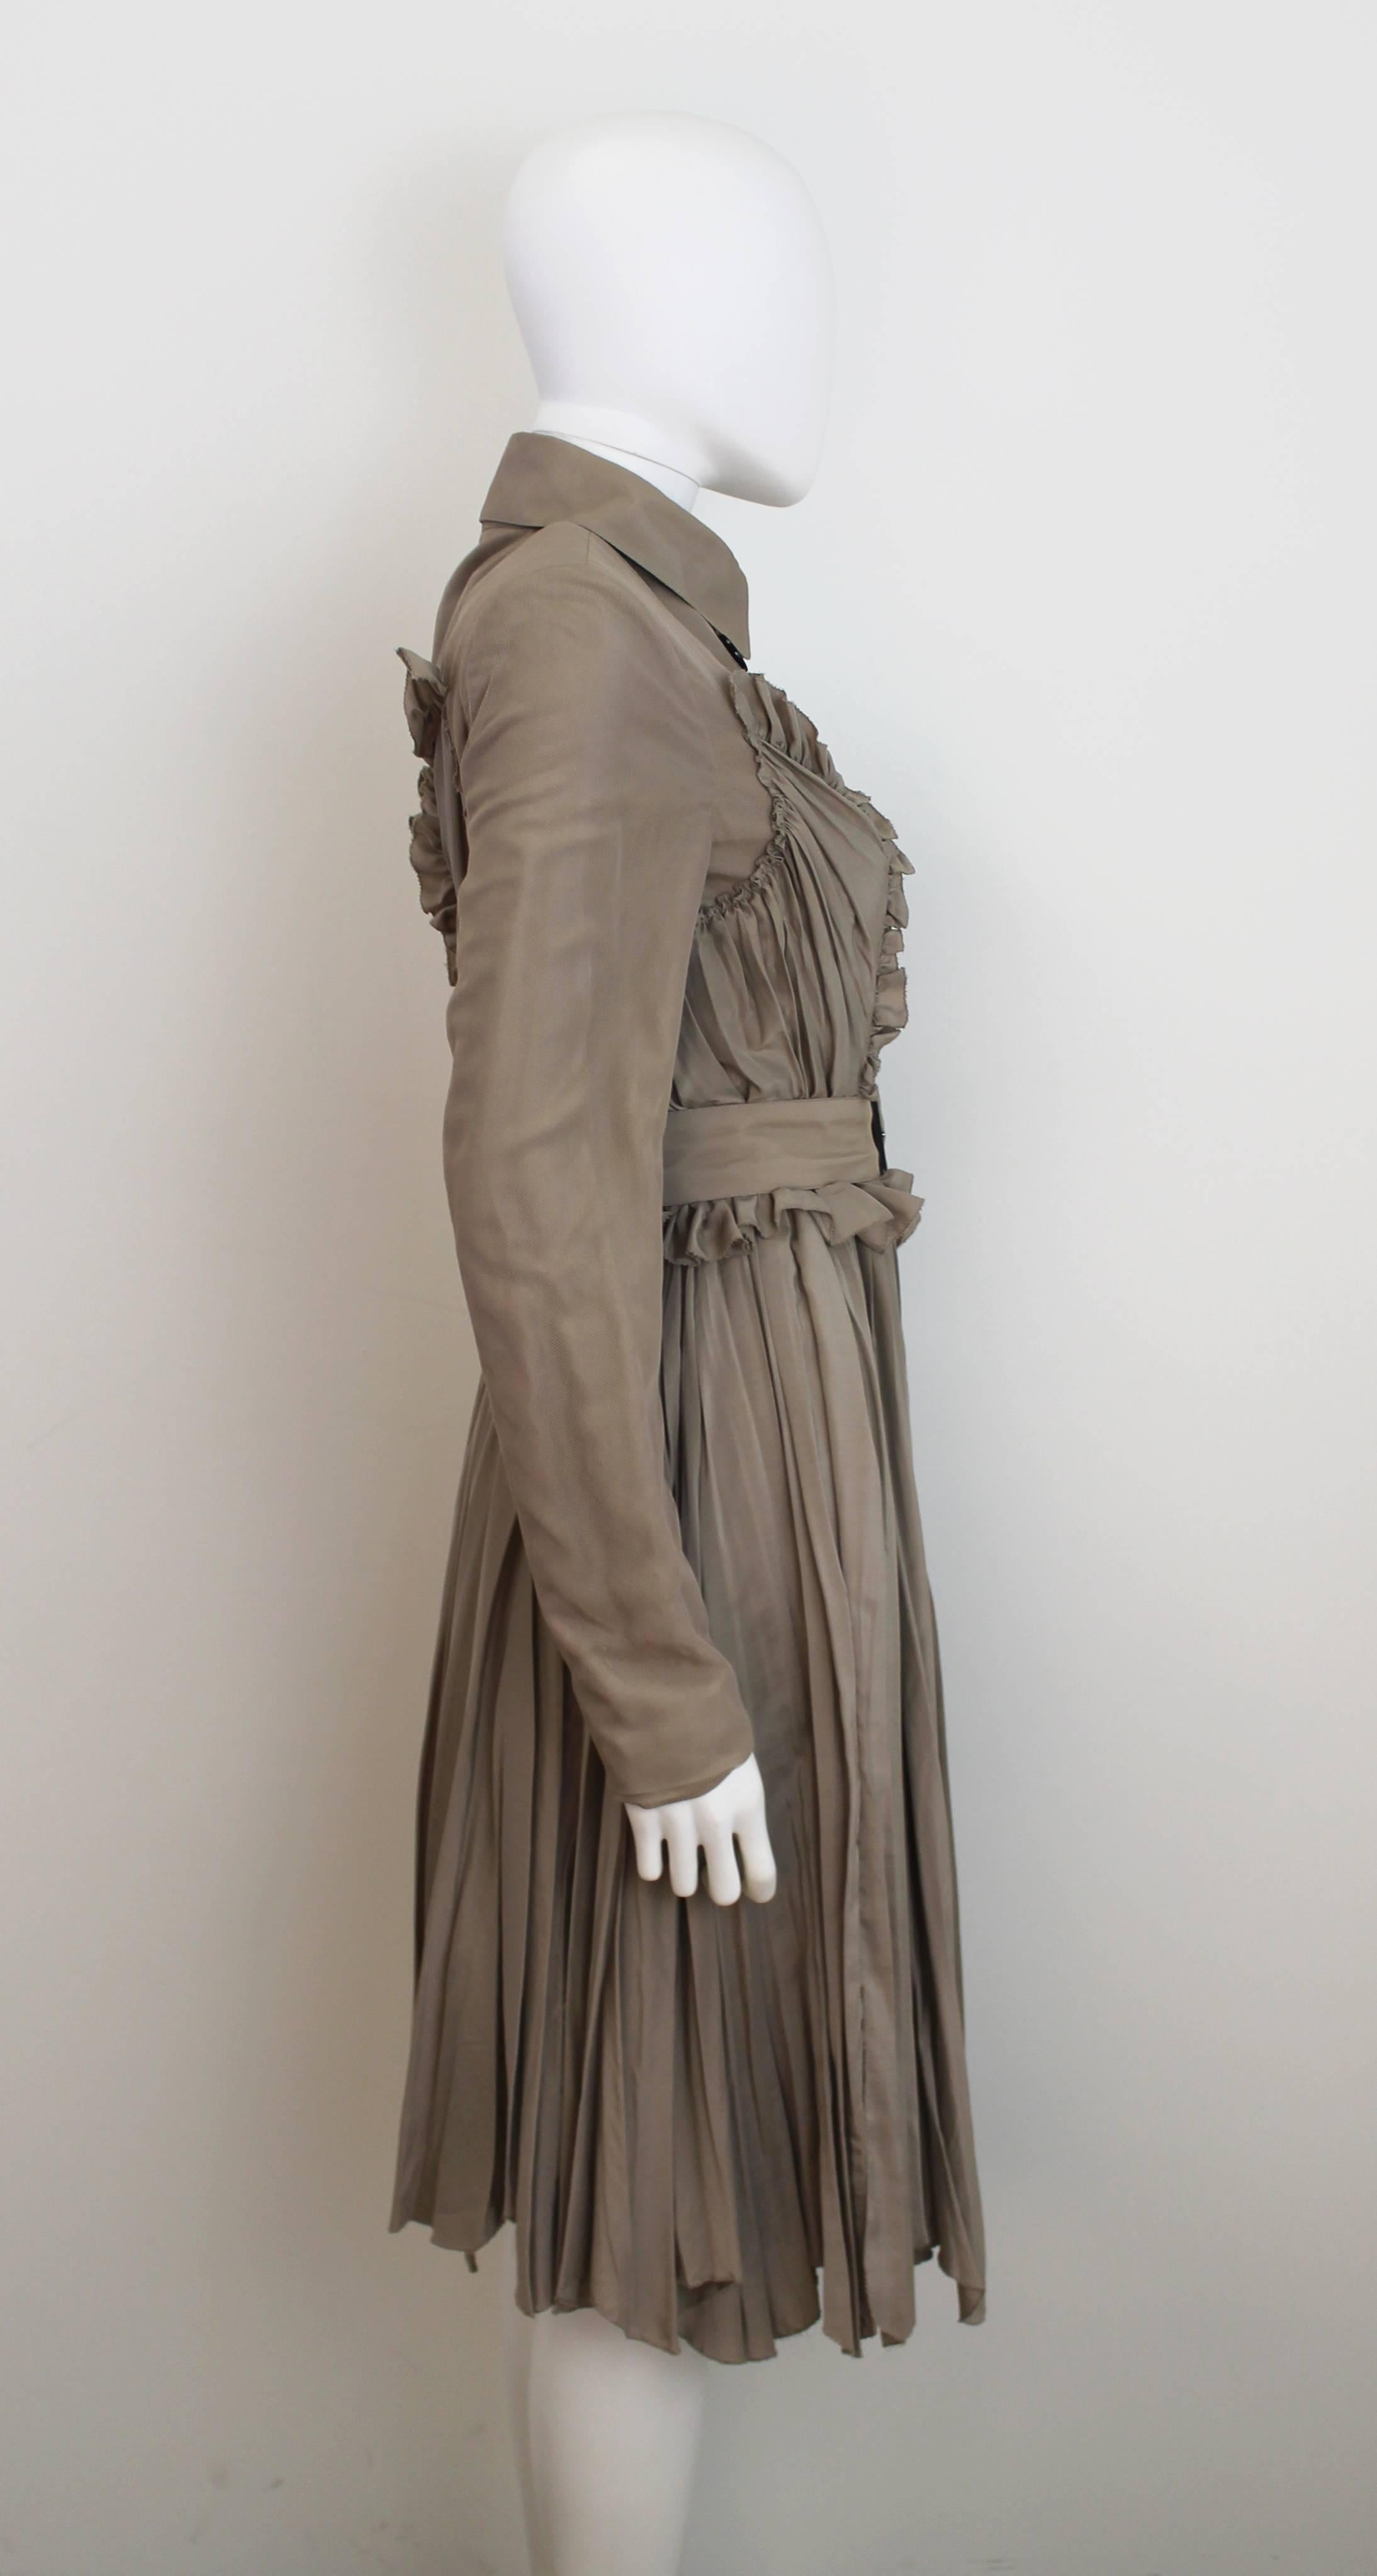 A double-breasted Burberry Prorsum trench in the style of a dress, with pleated and ruched detailing on the skirt juxtaposed with an overlay of silk tulle along the sleeves and neck. From Resort 2010 collection.
A modern take on the classic